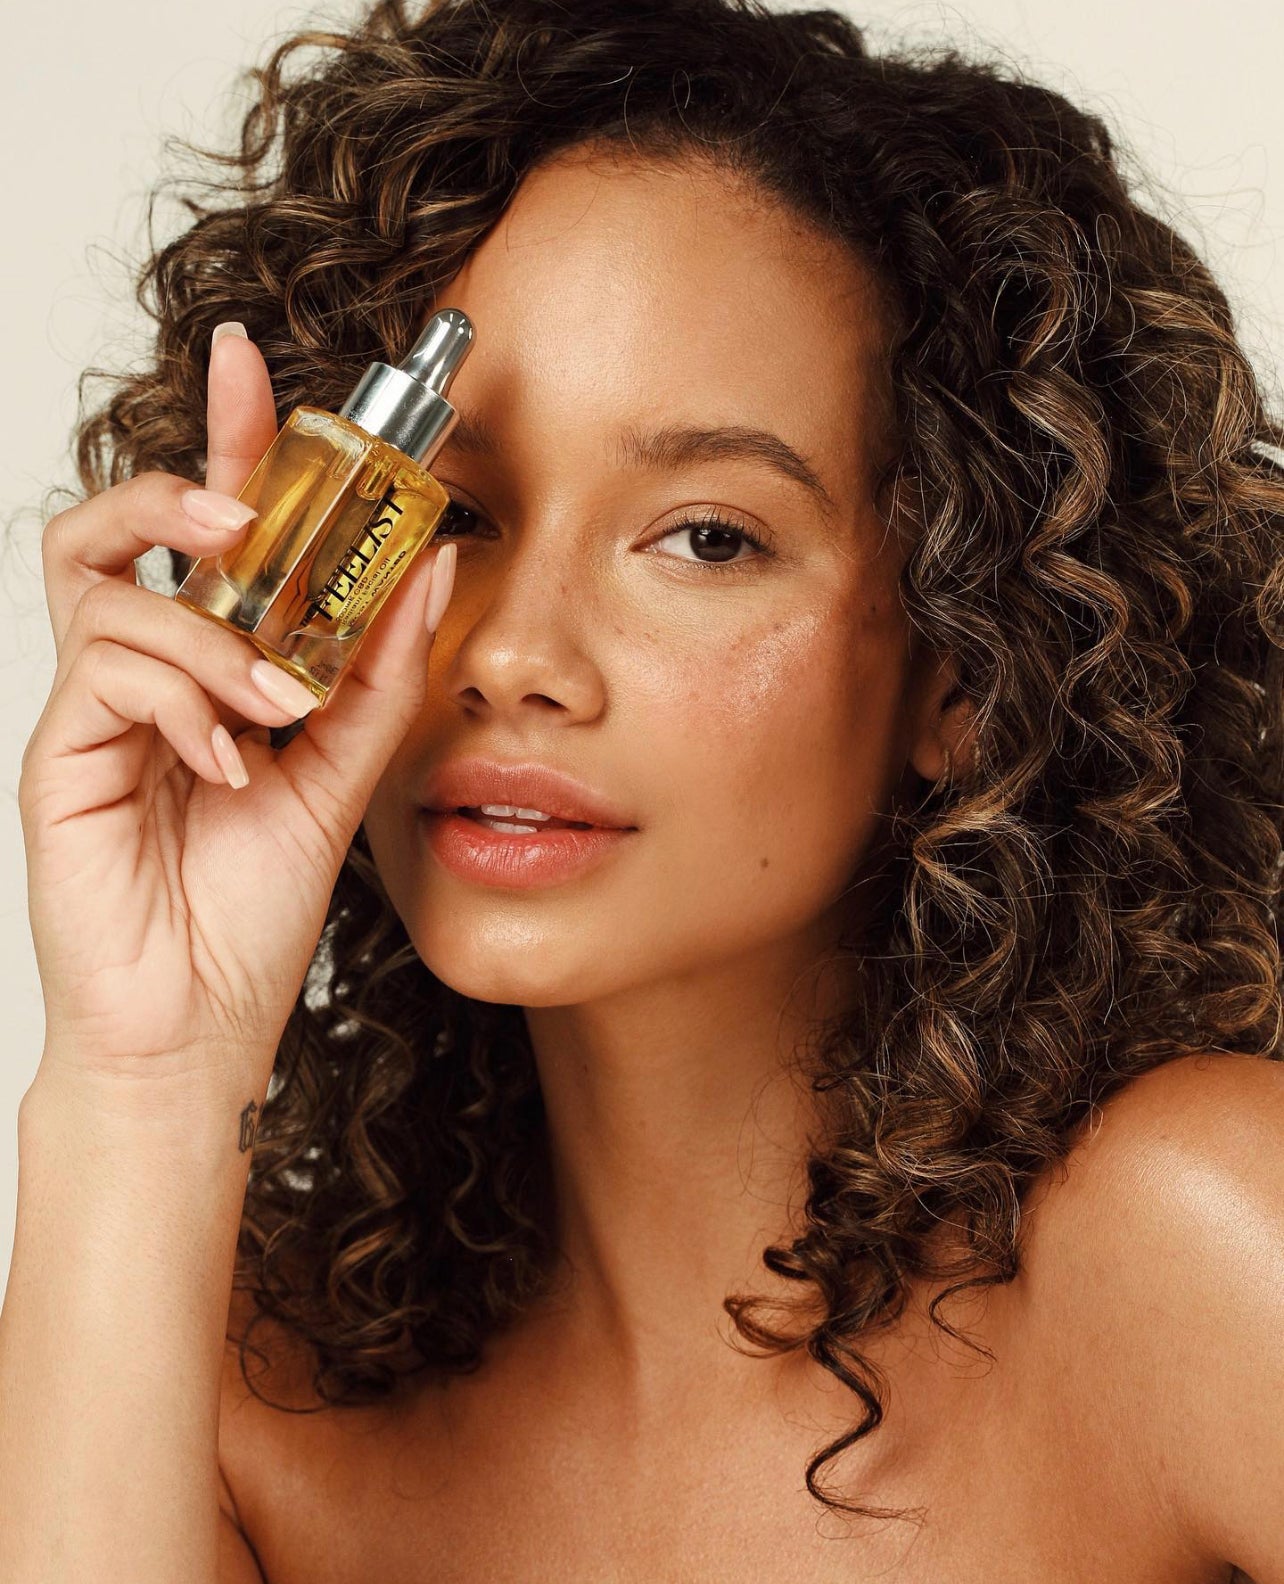 HOW TO USE FACIAL OILS IF YOU HAVE ACNE-PRONE SKIN